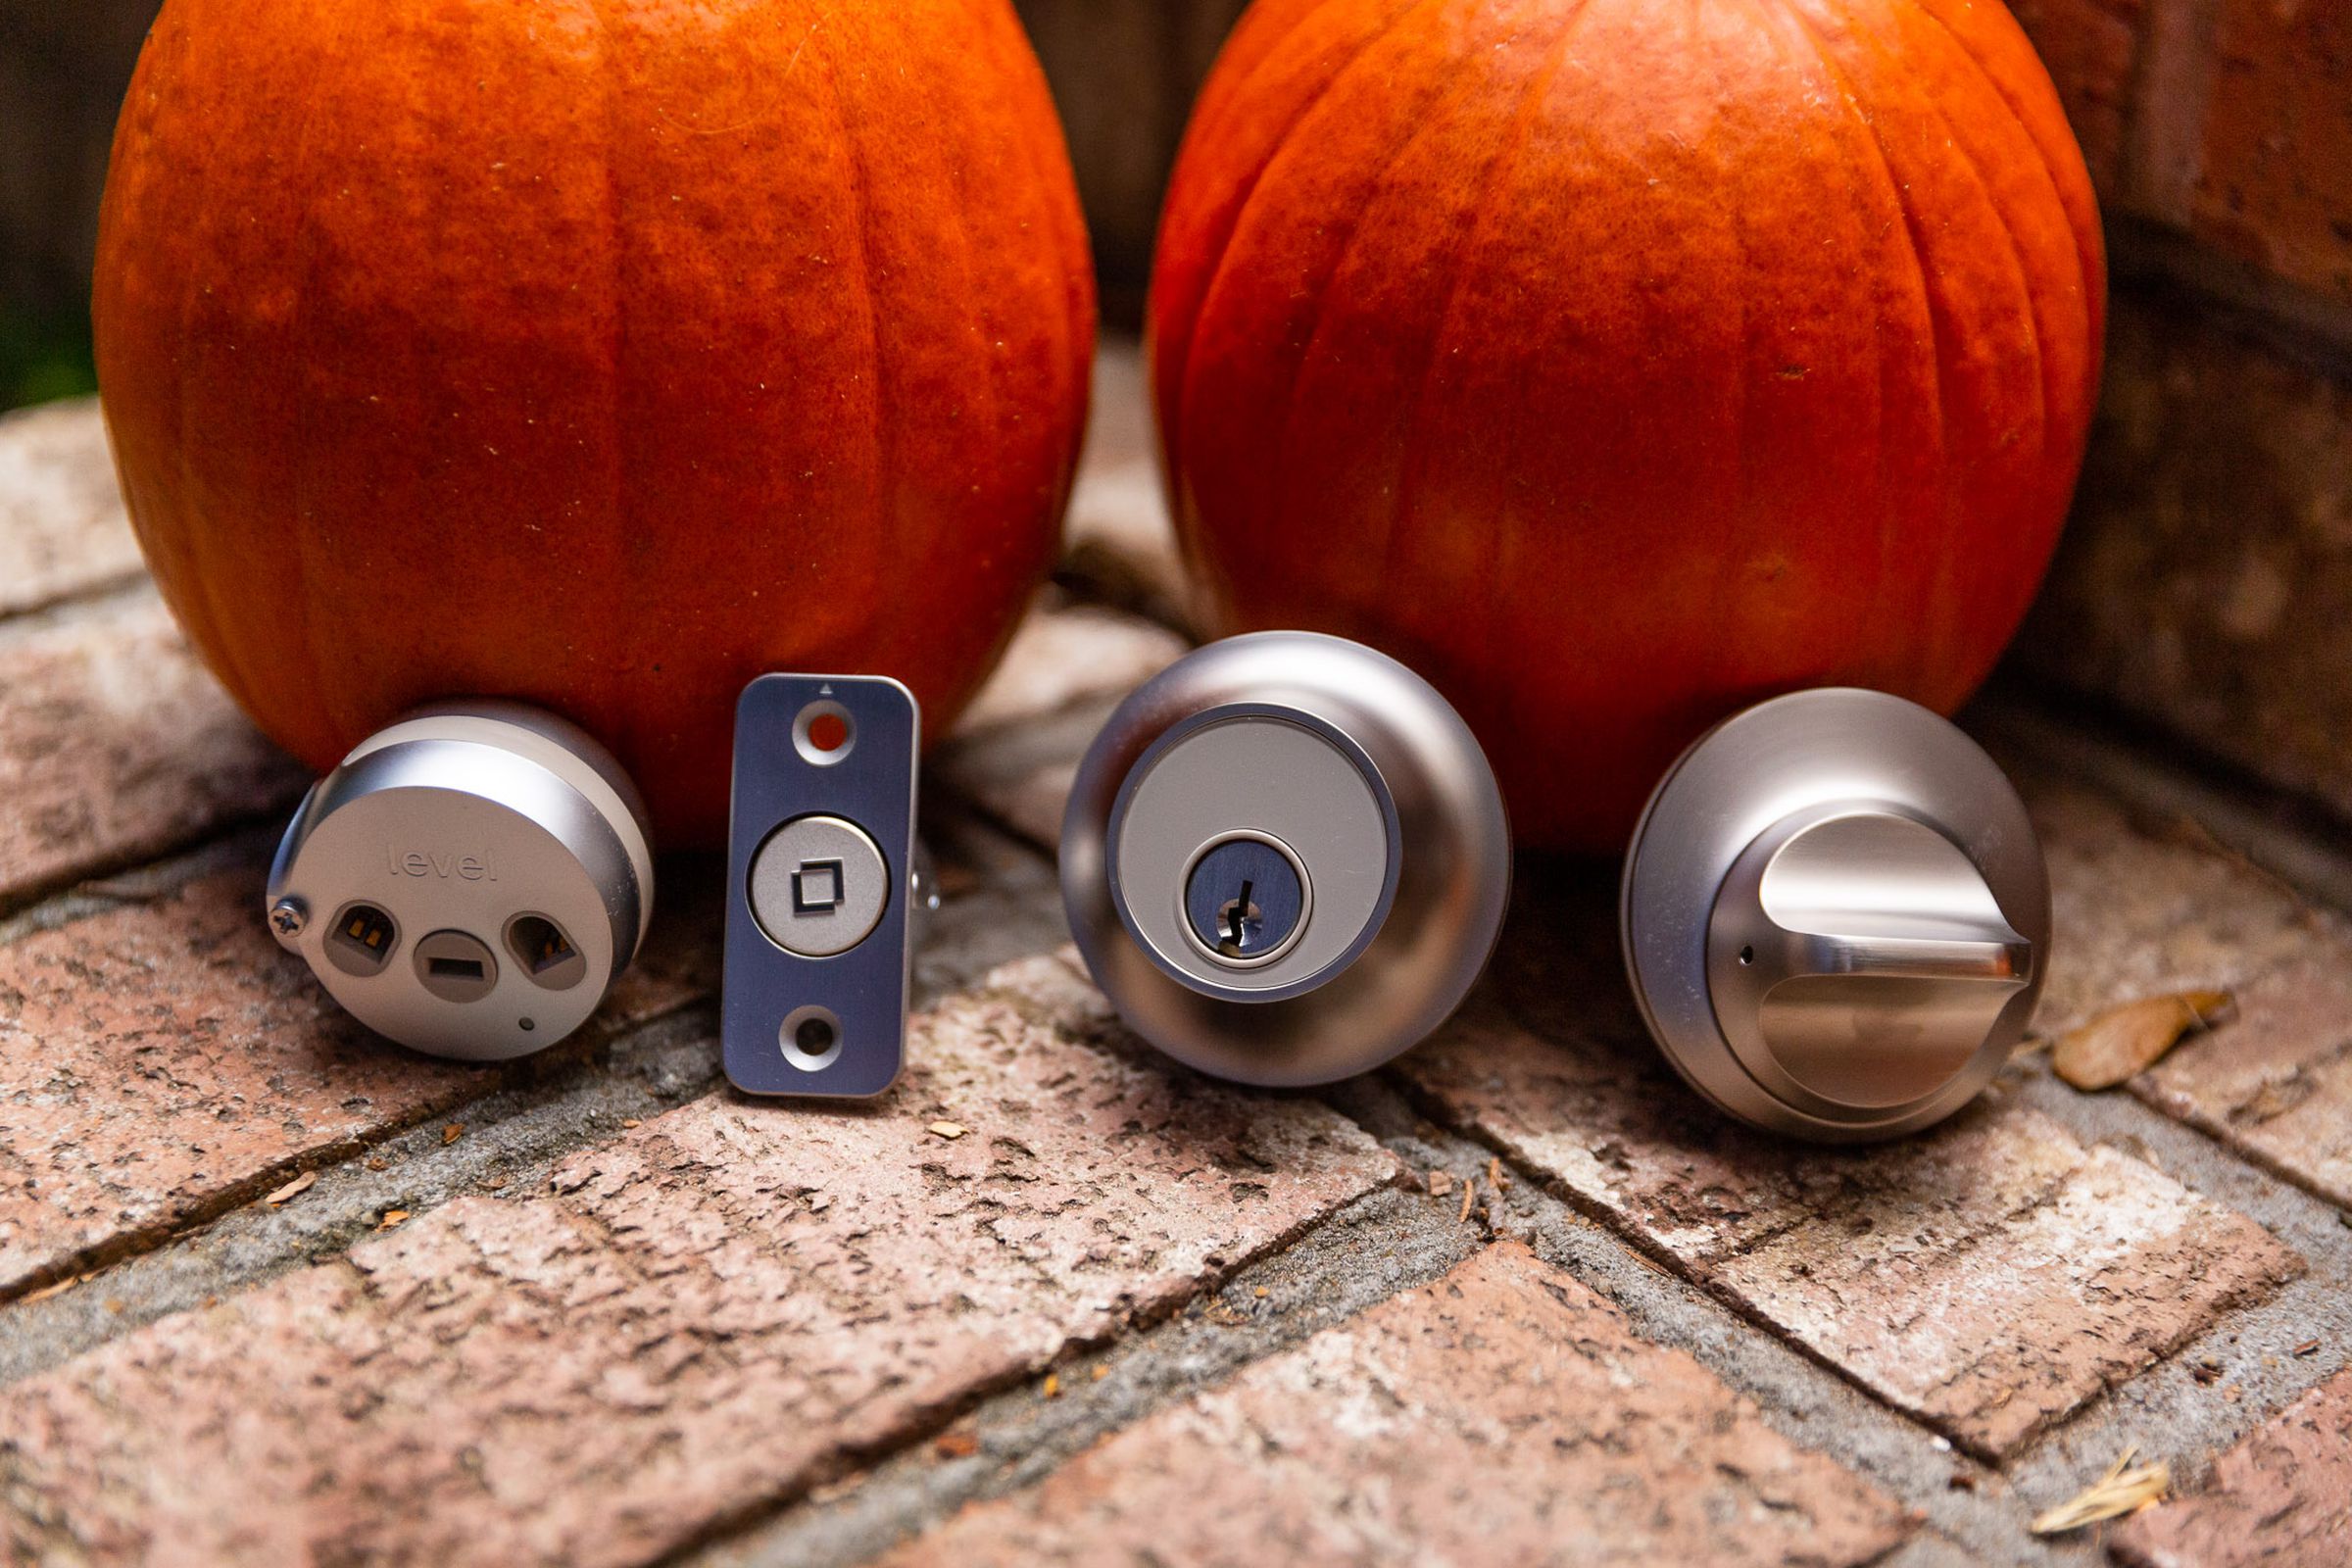 The components of the Level Lock Plus arranged per the caption. The caption doesn’t mention the two pumpkins in the background, but they’re there.